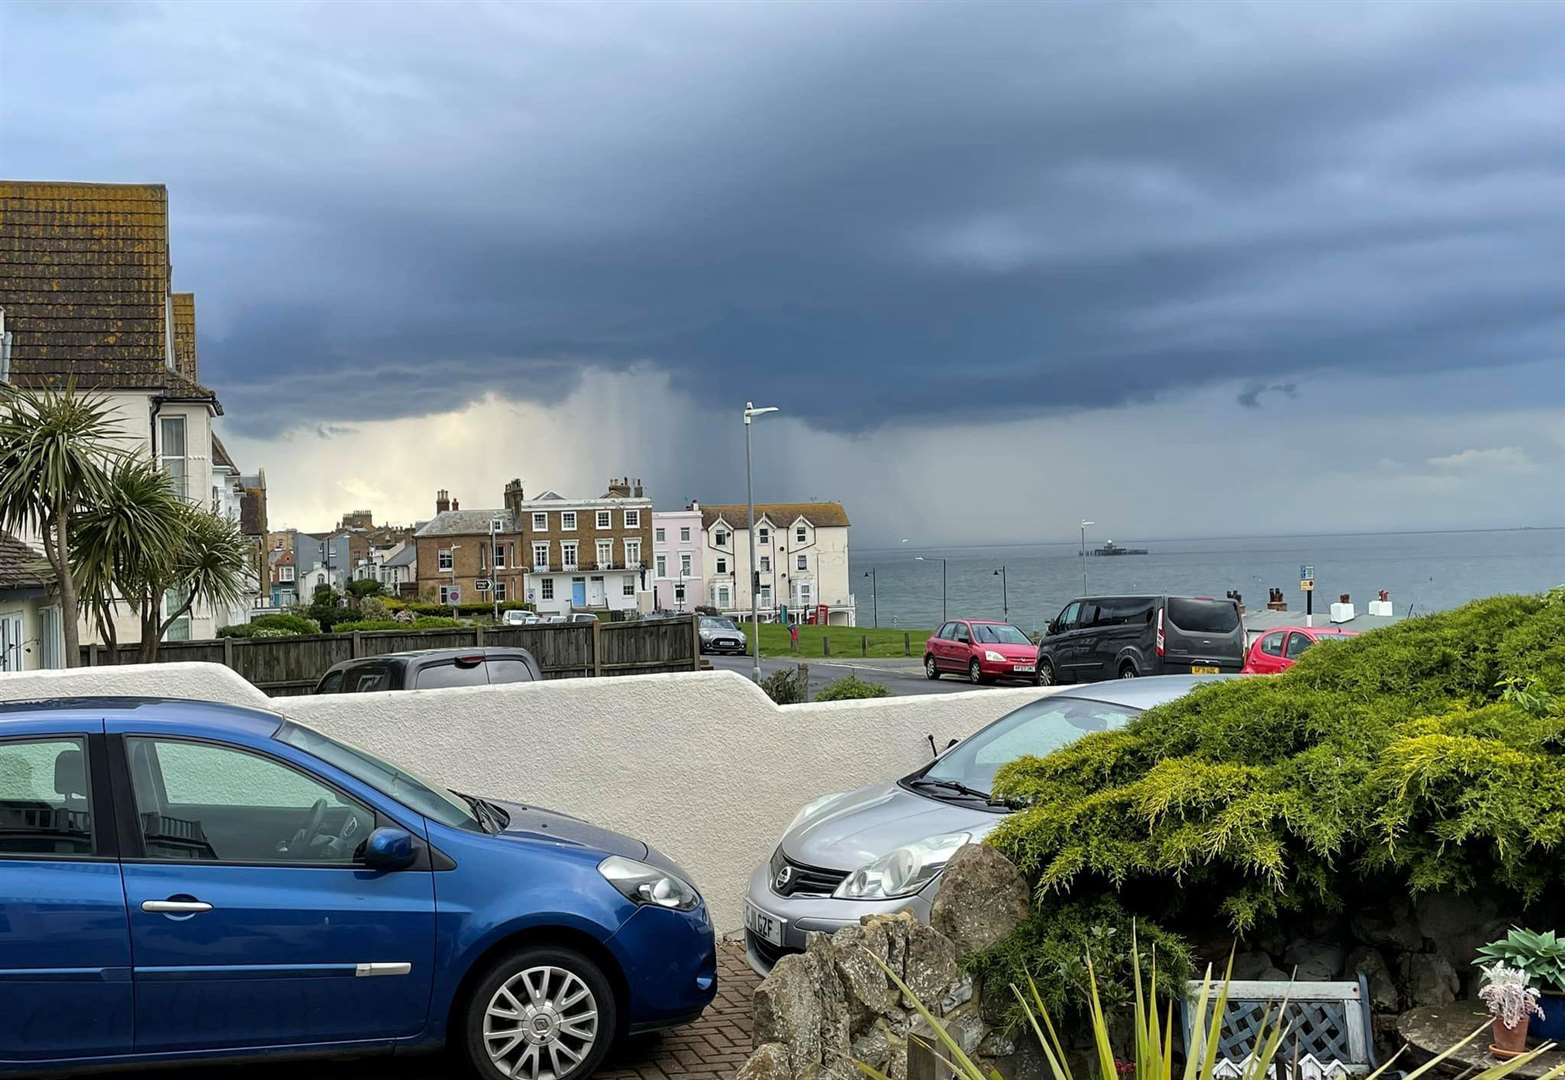 Residents saw the strom coming in across the horizion. Picture: Jeanne Hildrew